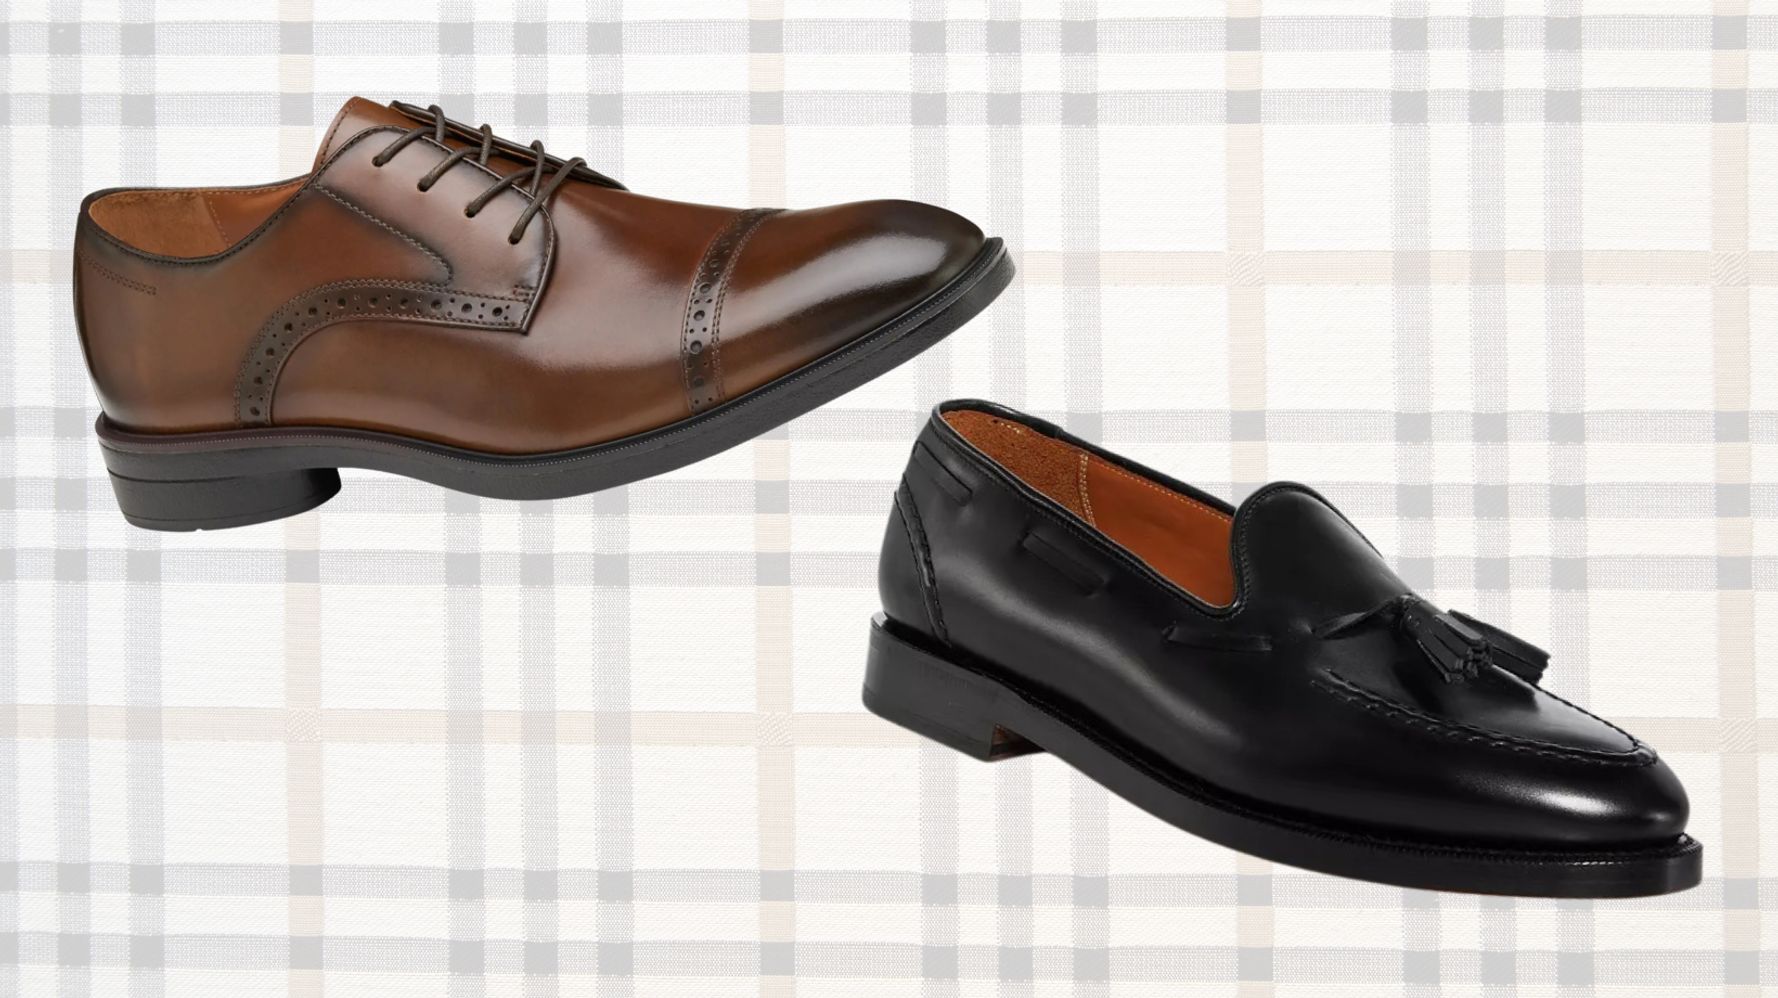 Magnanni Shoe Perfect for Weddings on Sale at Nordstrom Rack - Men's Journal